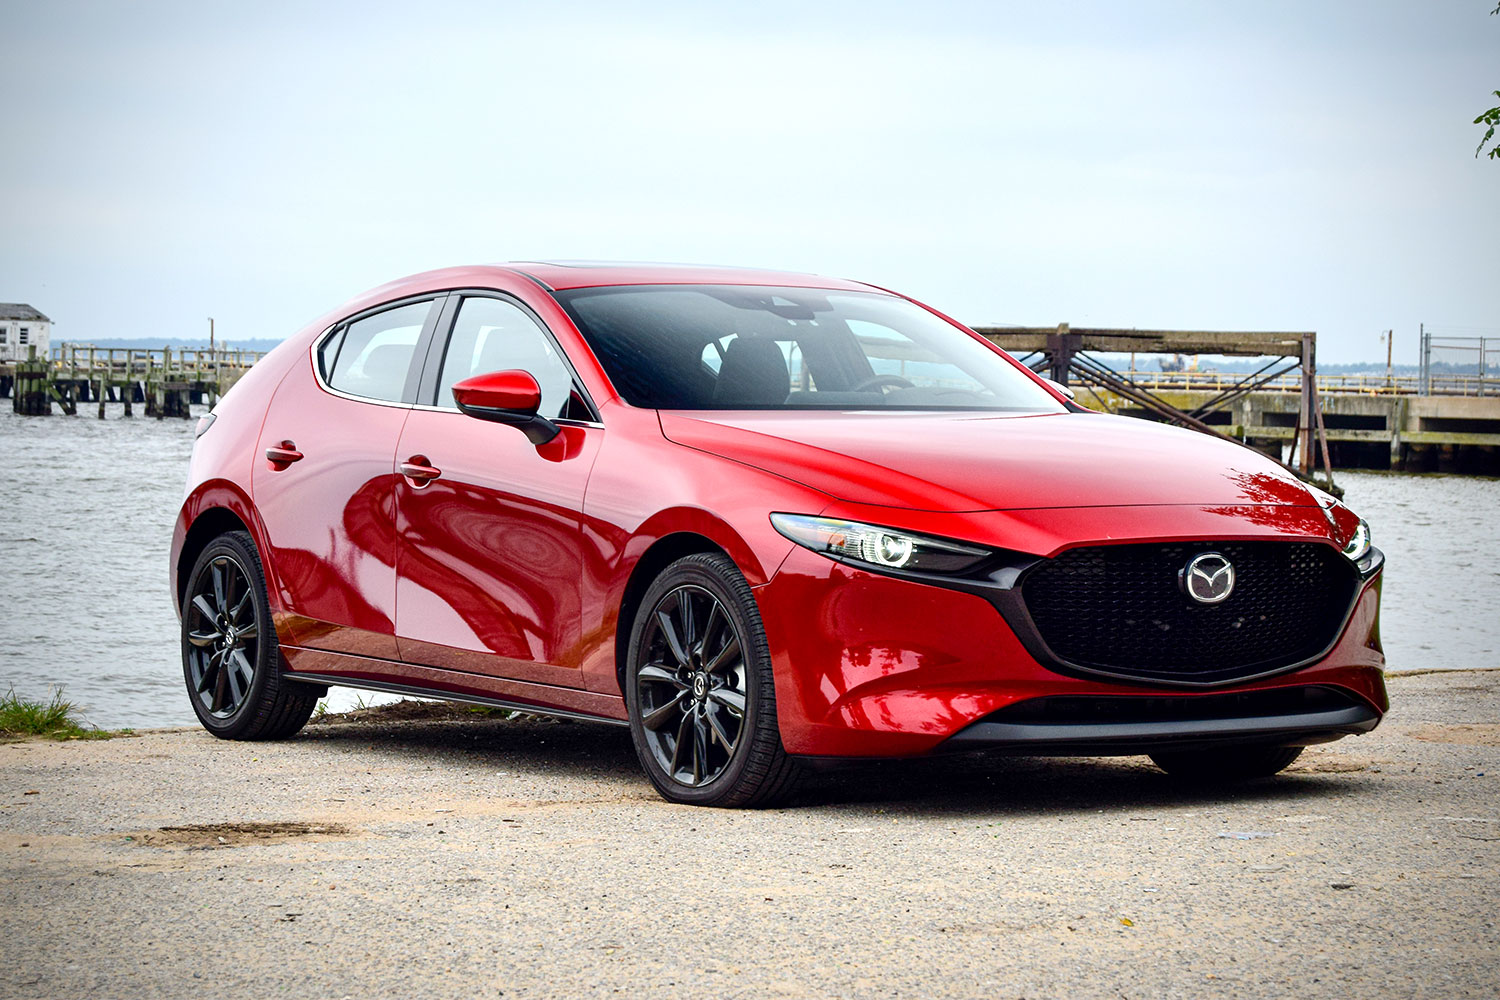 Mazda3 Hatchback Review Going Upstream Was a Brilliant Idea for Mazda   The Manual